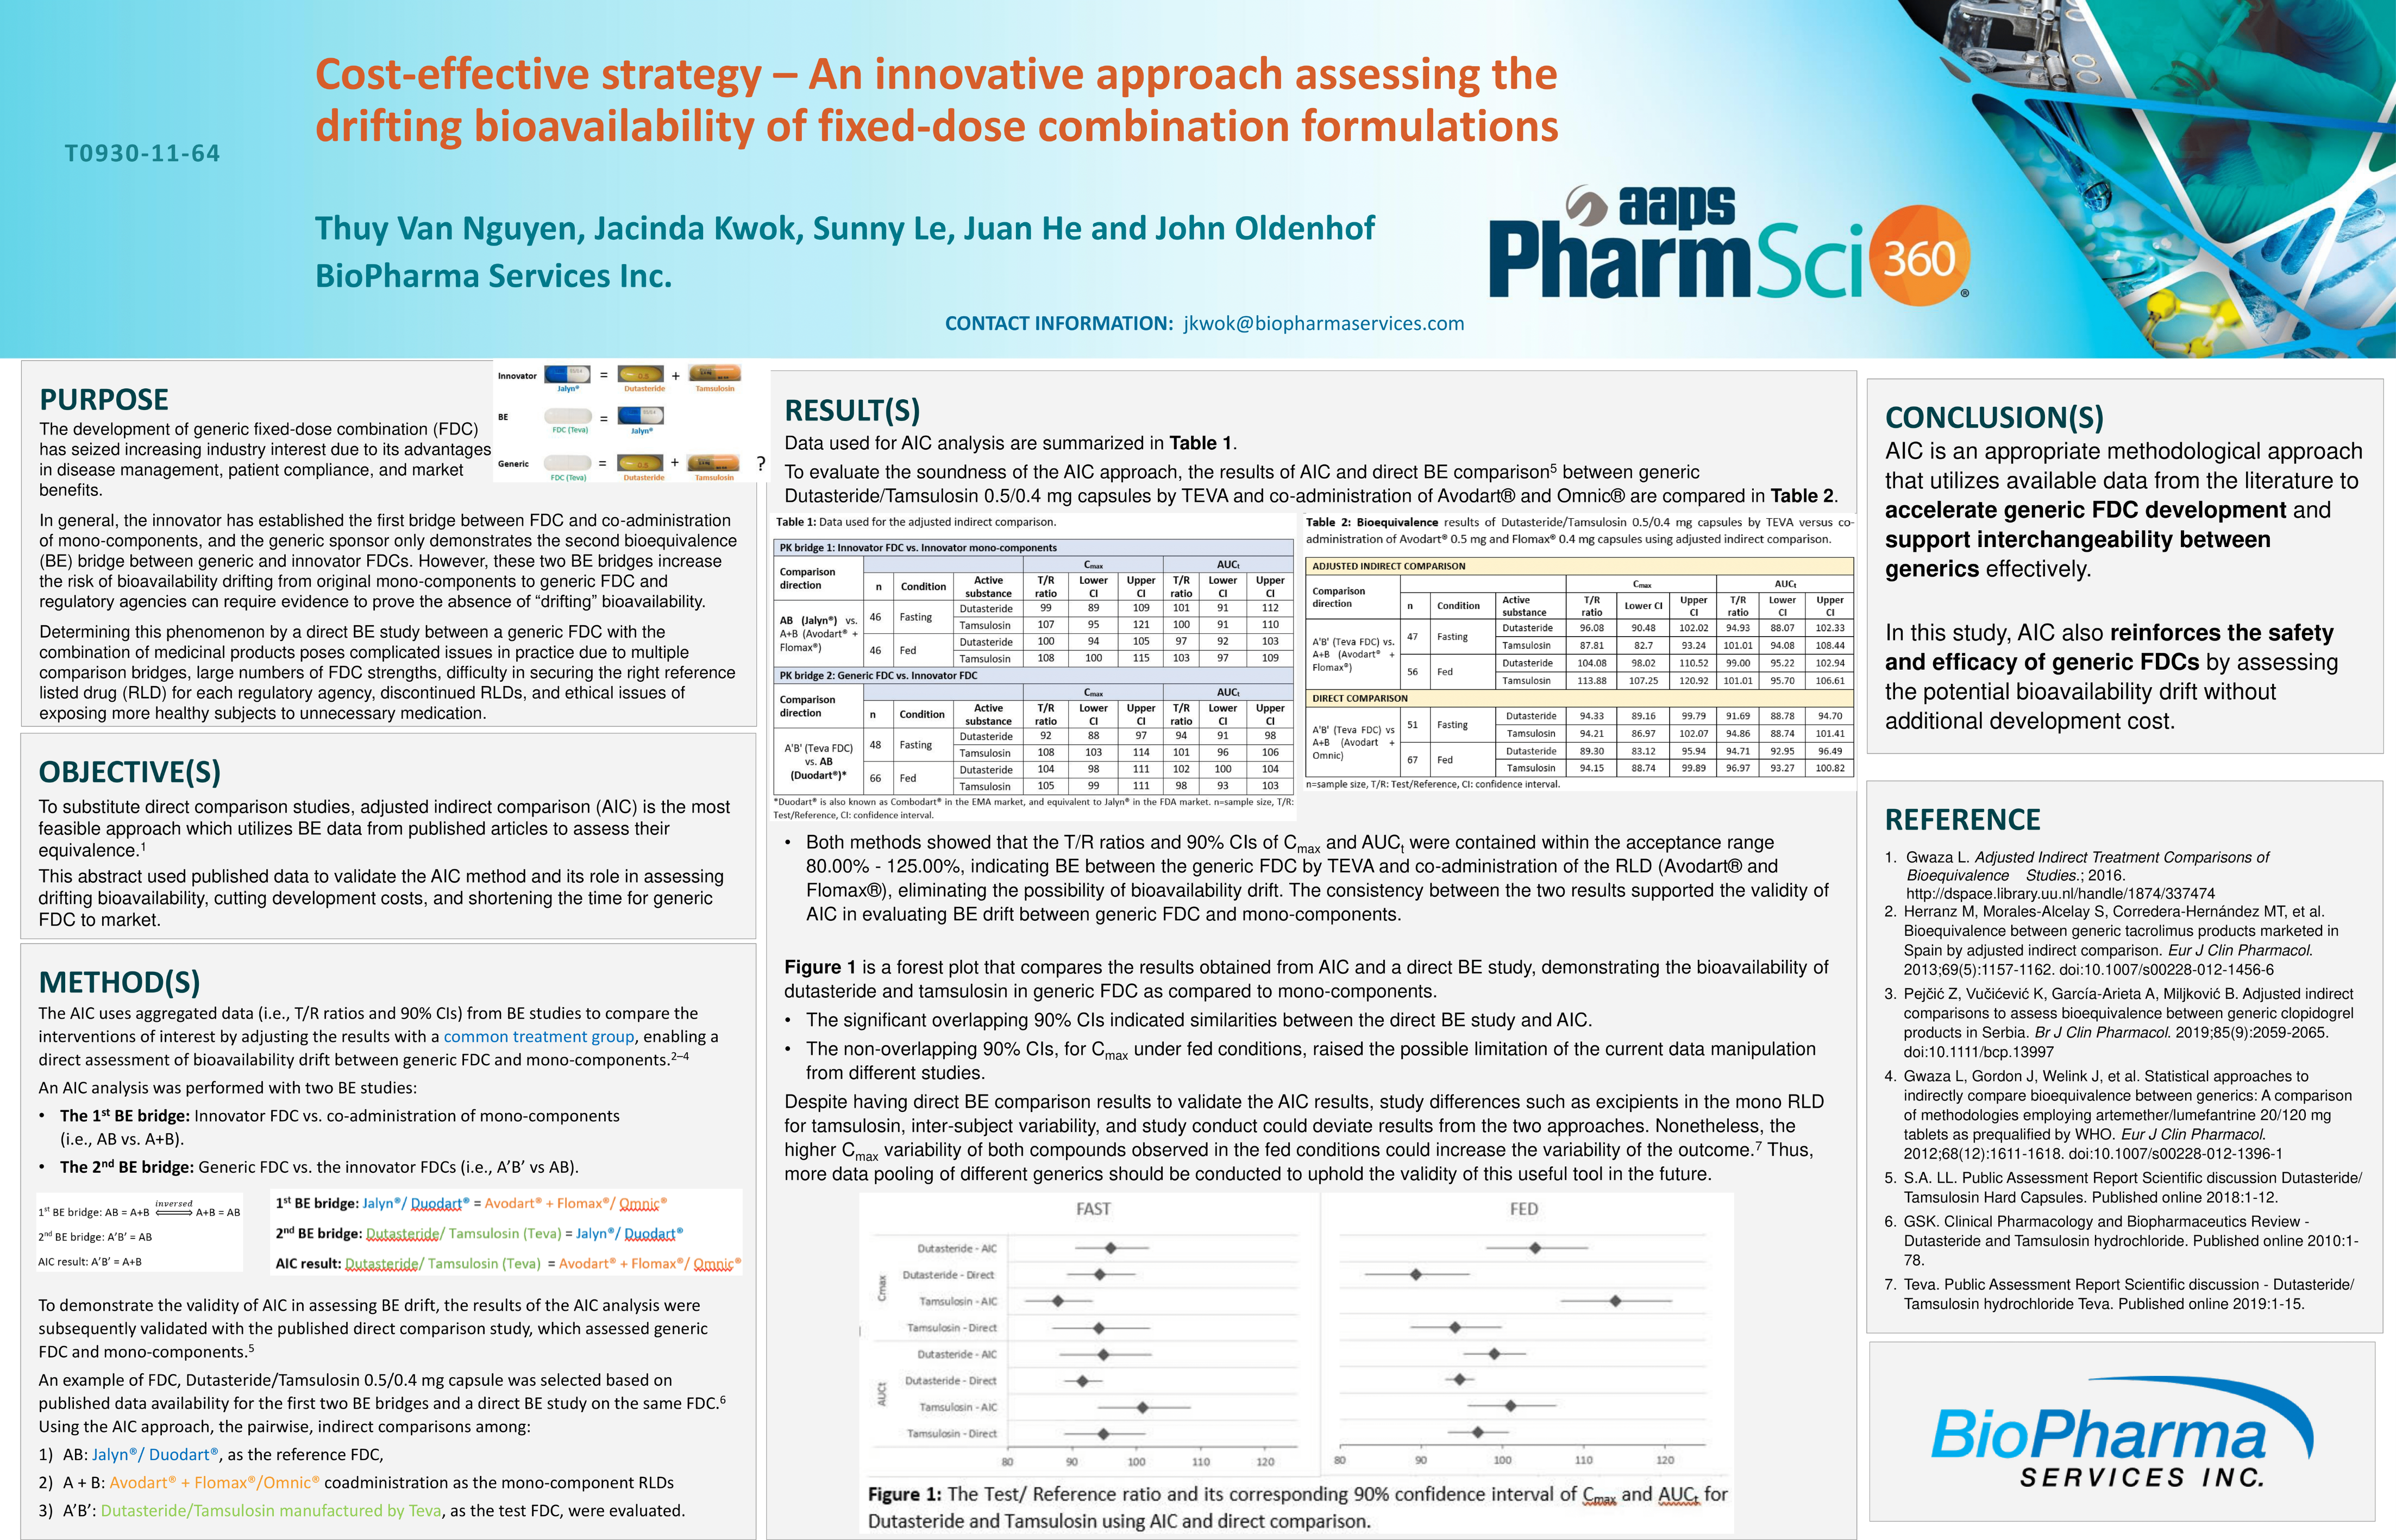 Cost-effective strategy –An innovative approach assessing the drifting bioavailability of fixed-dose combination formulations image.